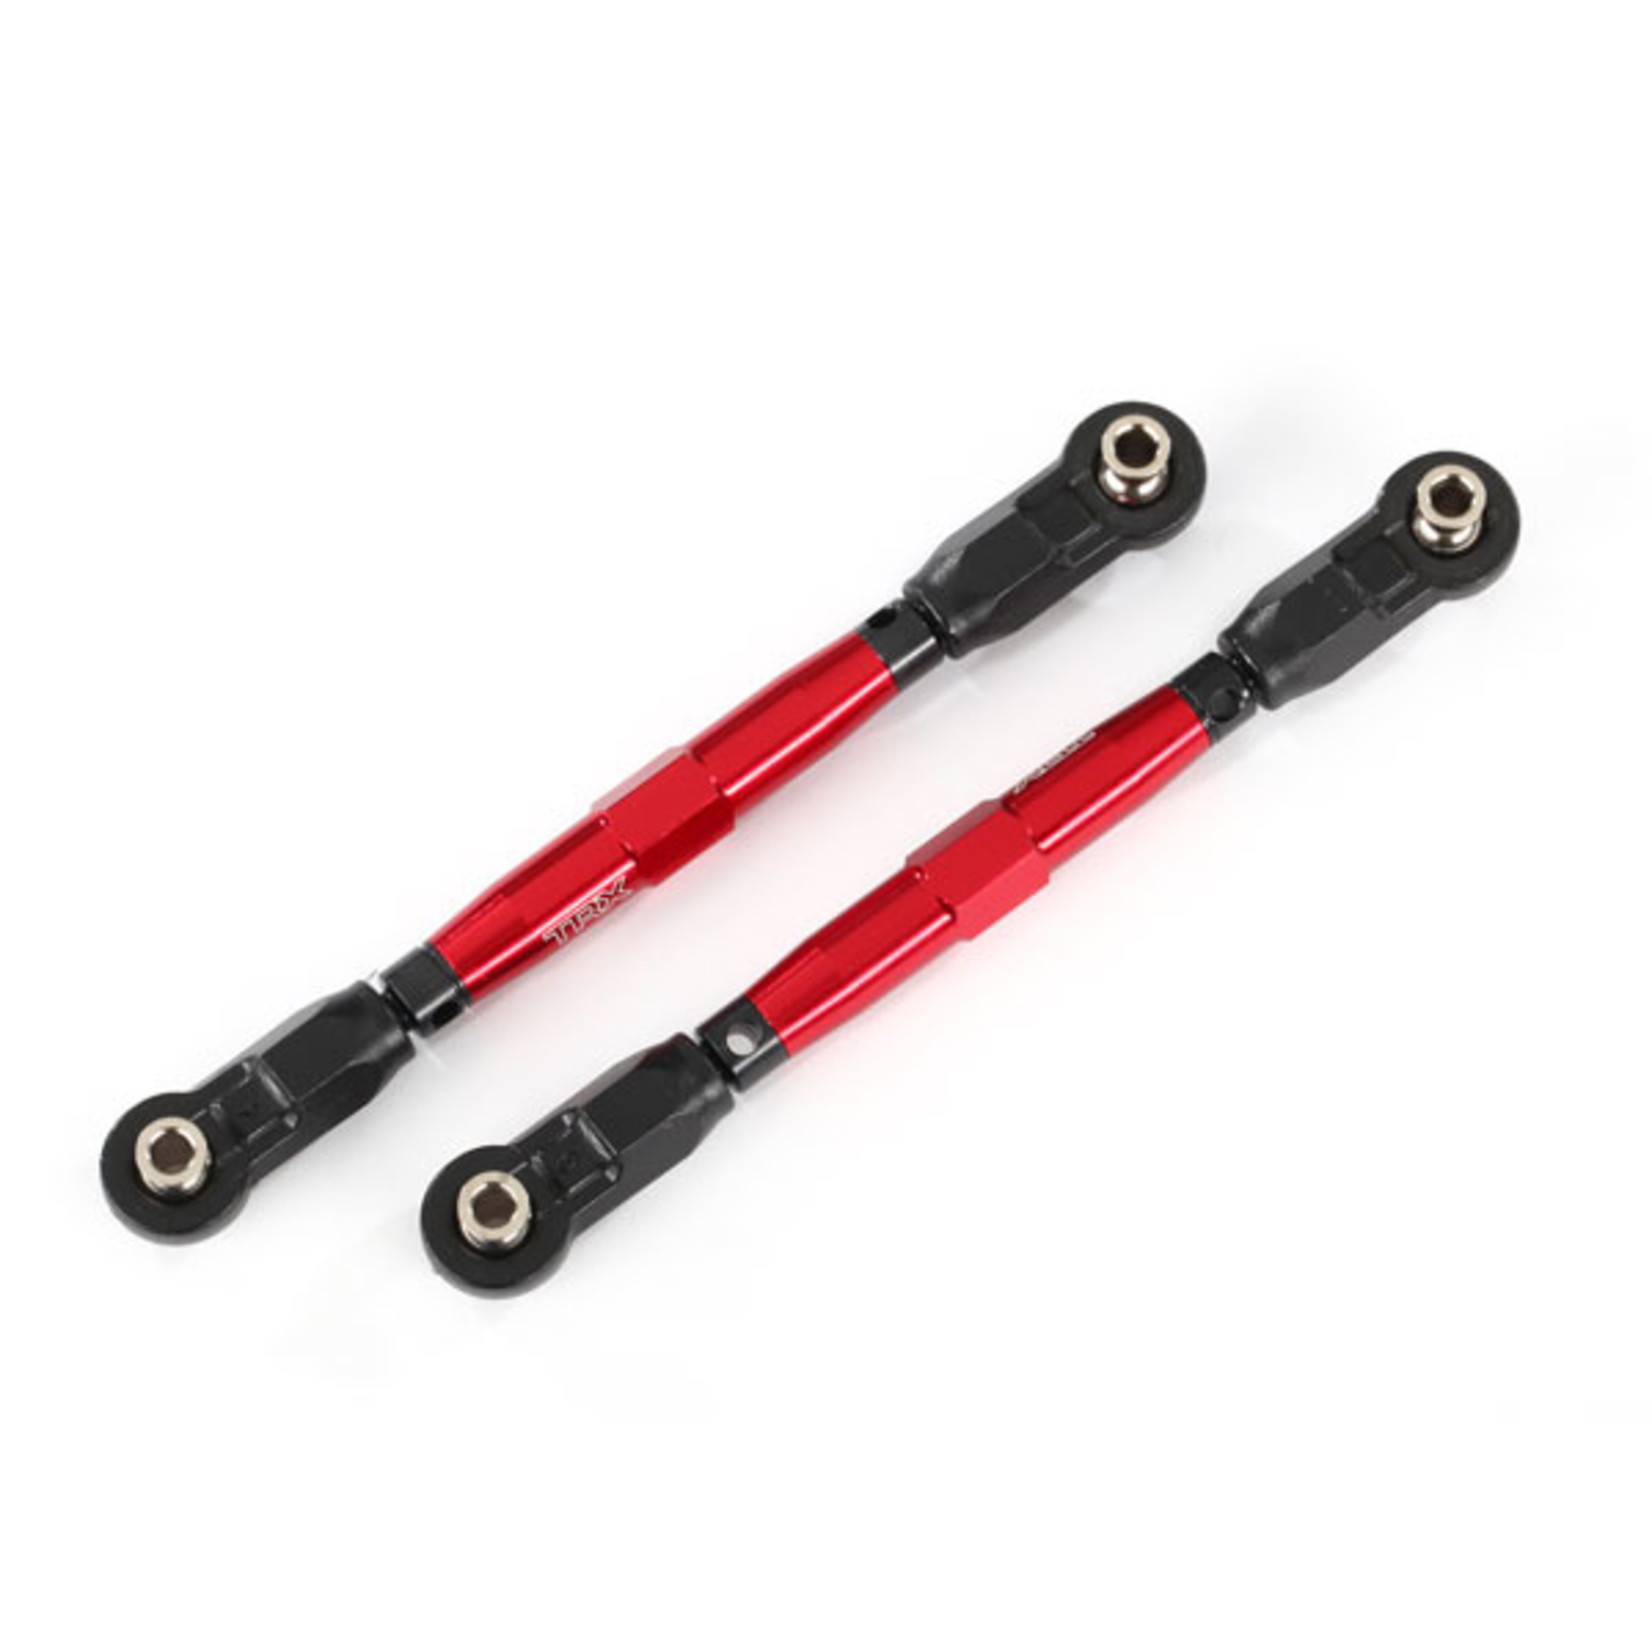 Traxxas 8948R - Toe links, front (TUBES red-anodized, 7075